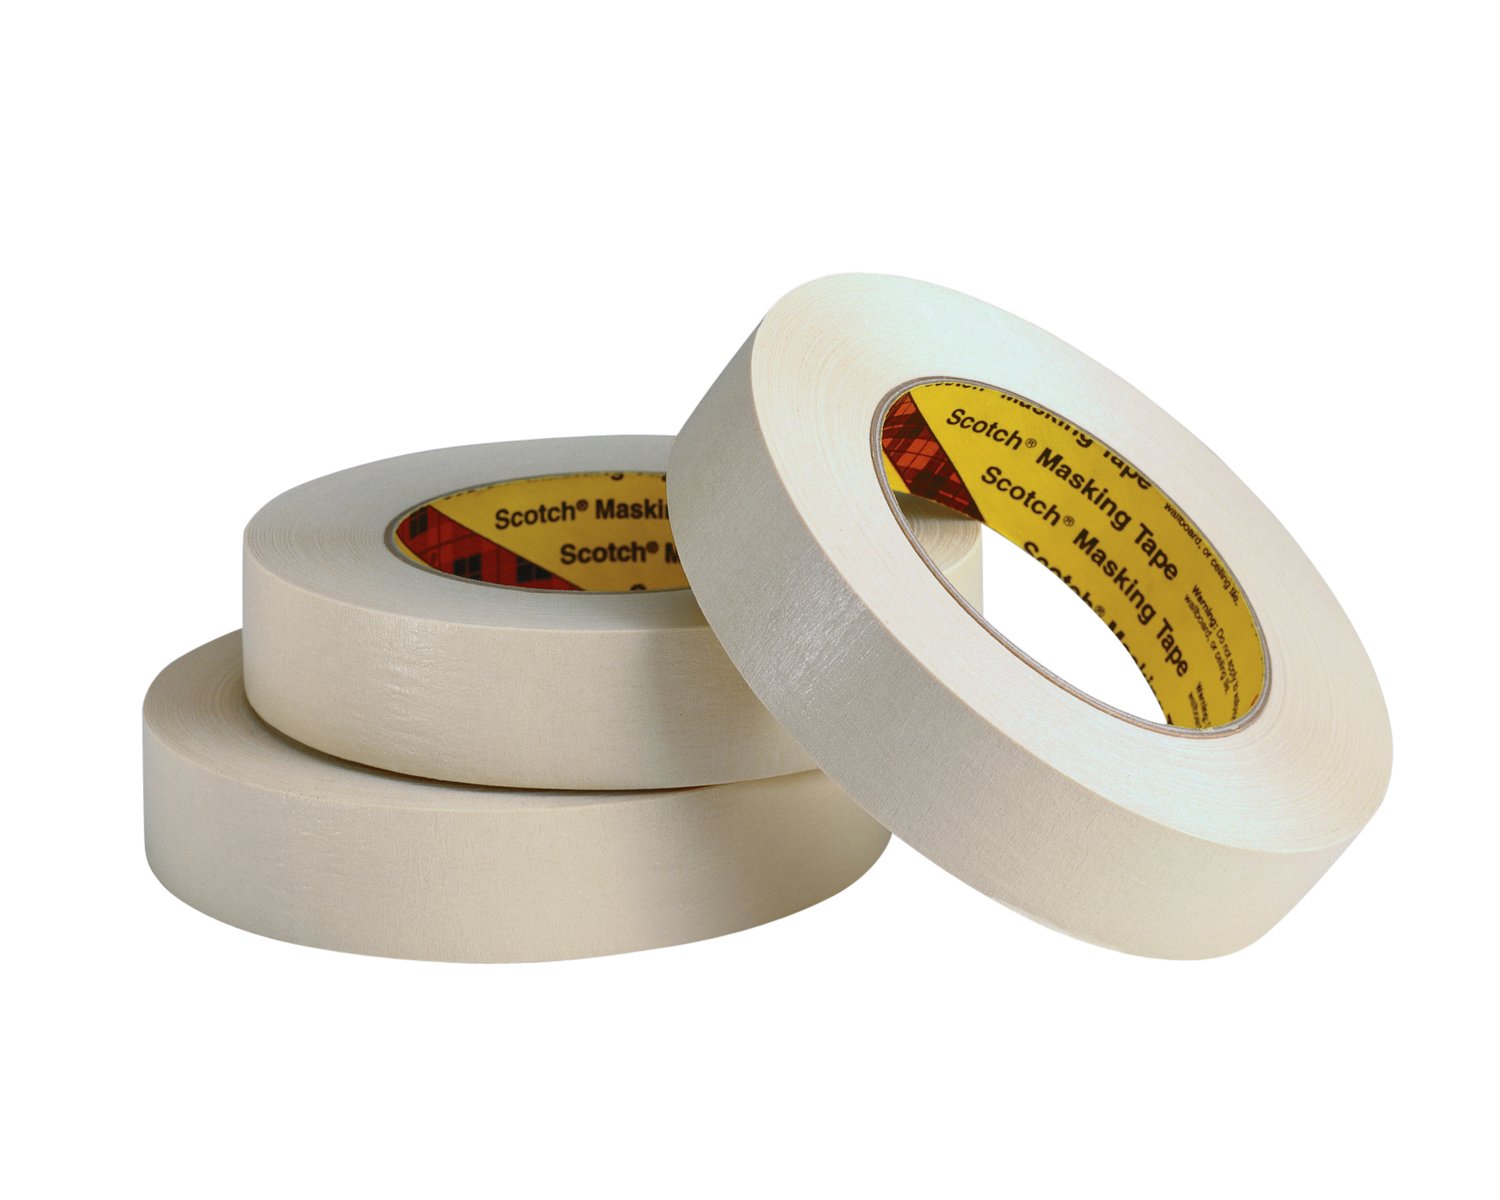 7010334145 - 3M Paint Masking Tape 231/231A, Tan, 57 in x 60 yd, 7.6 mil, 1
Roll/Case